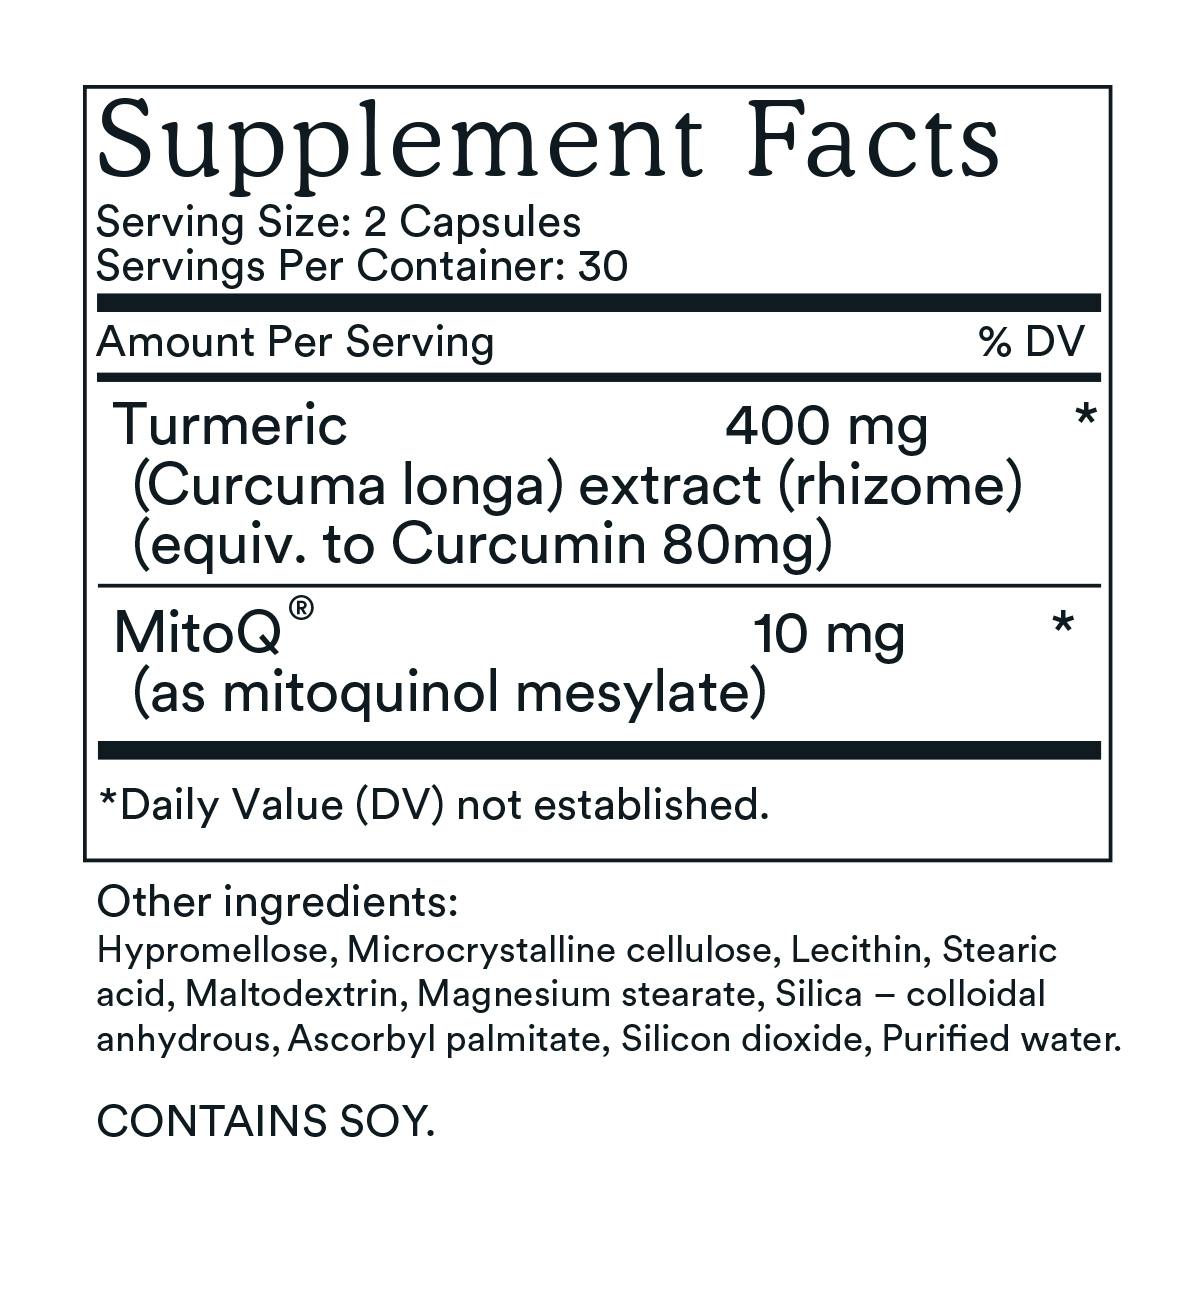 Supplement Facts label for MitoQ curcumin